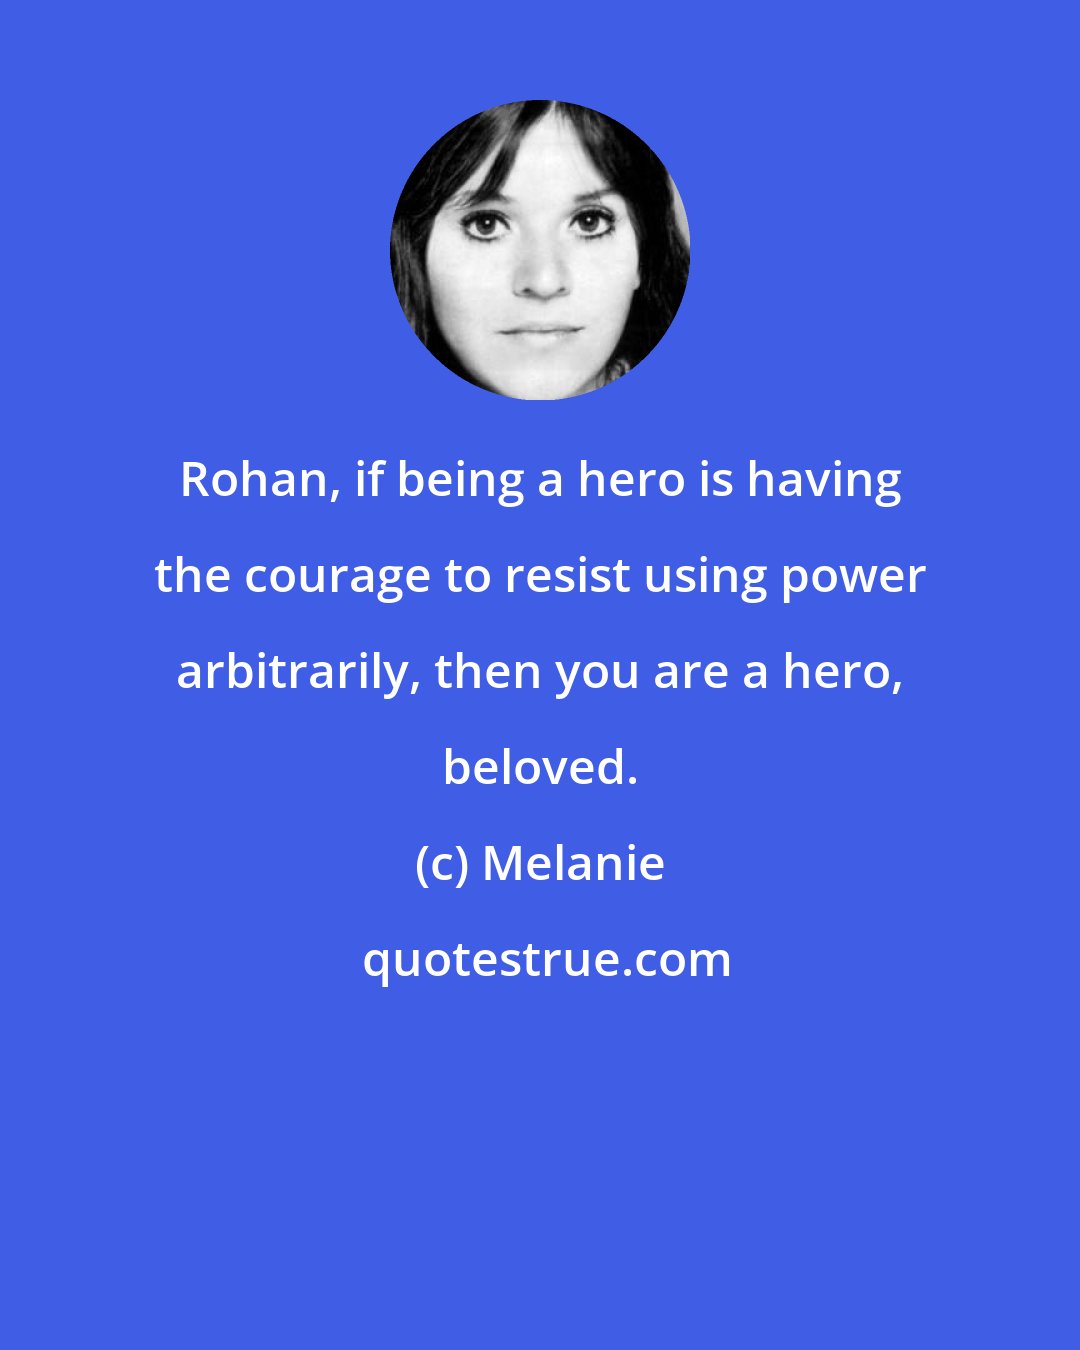 Melanie: Rohan, if being a hero is having the courage to resist using power arbitrarily, then you are a hero, beloved.